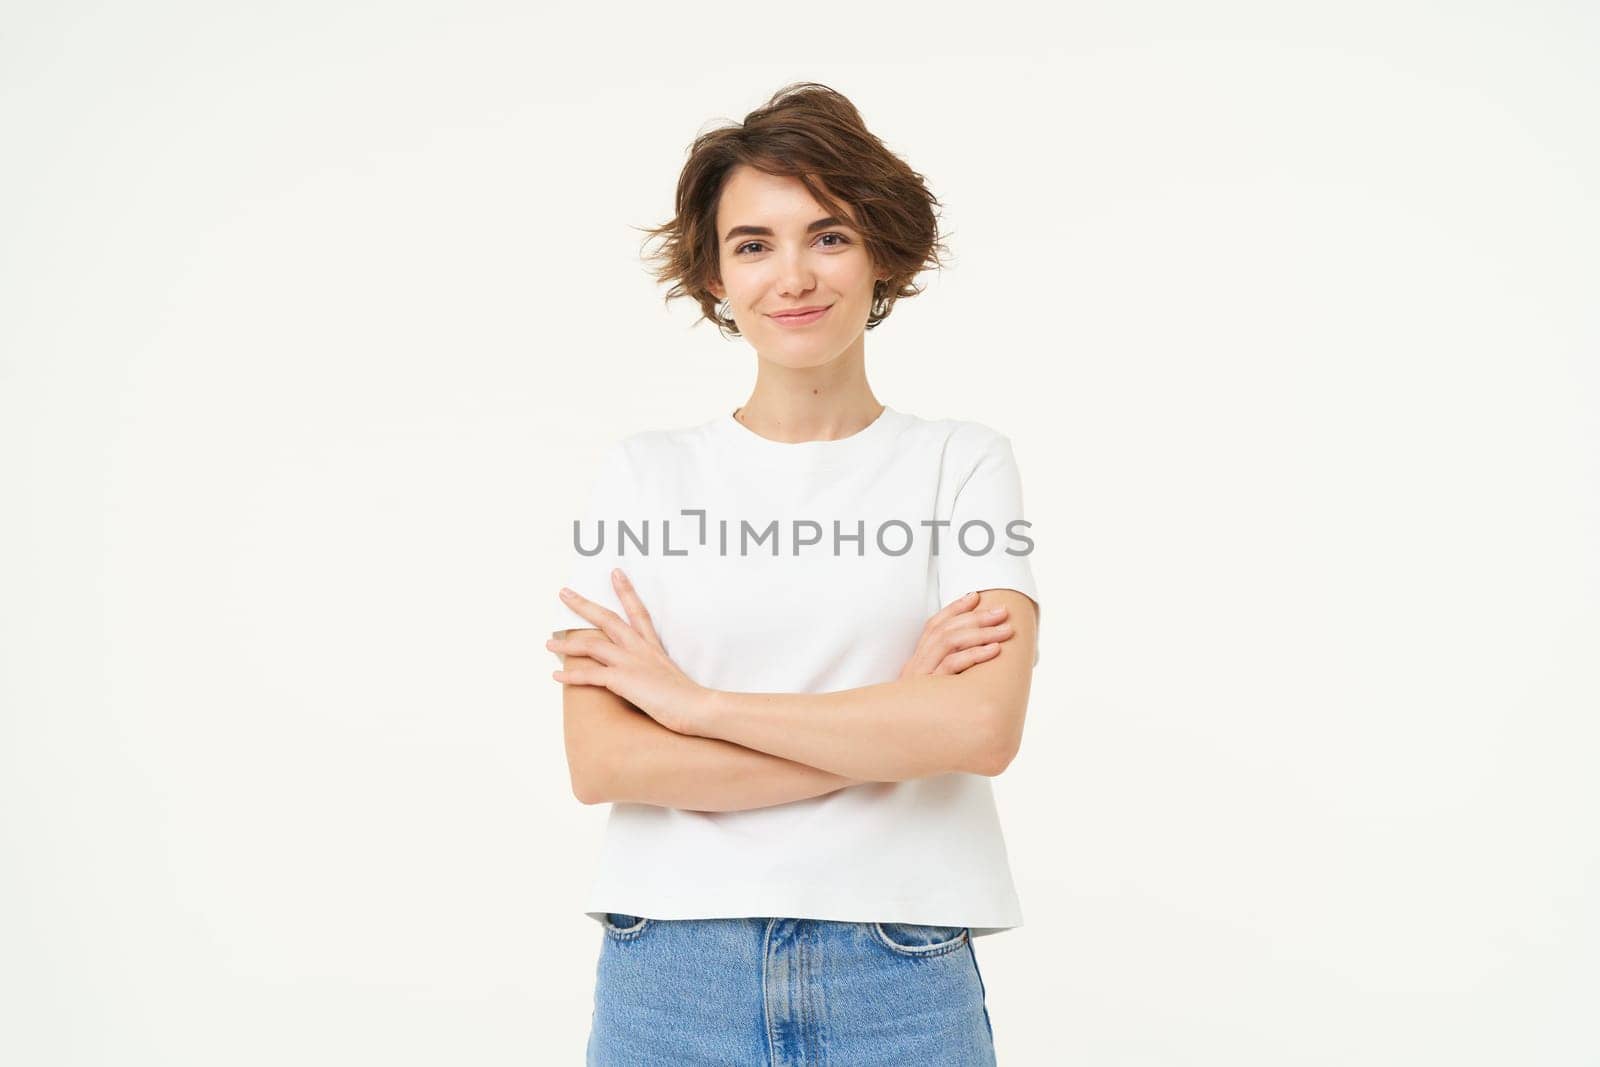 Portrait of woman standing in power pose, confident expression, cross arms on chest and smiles, stands over white background.